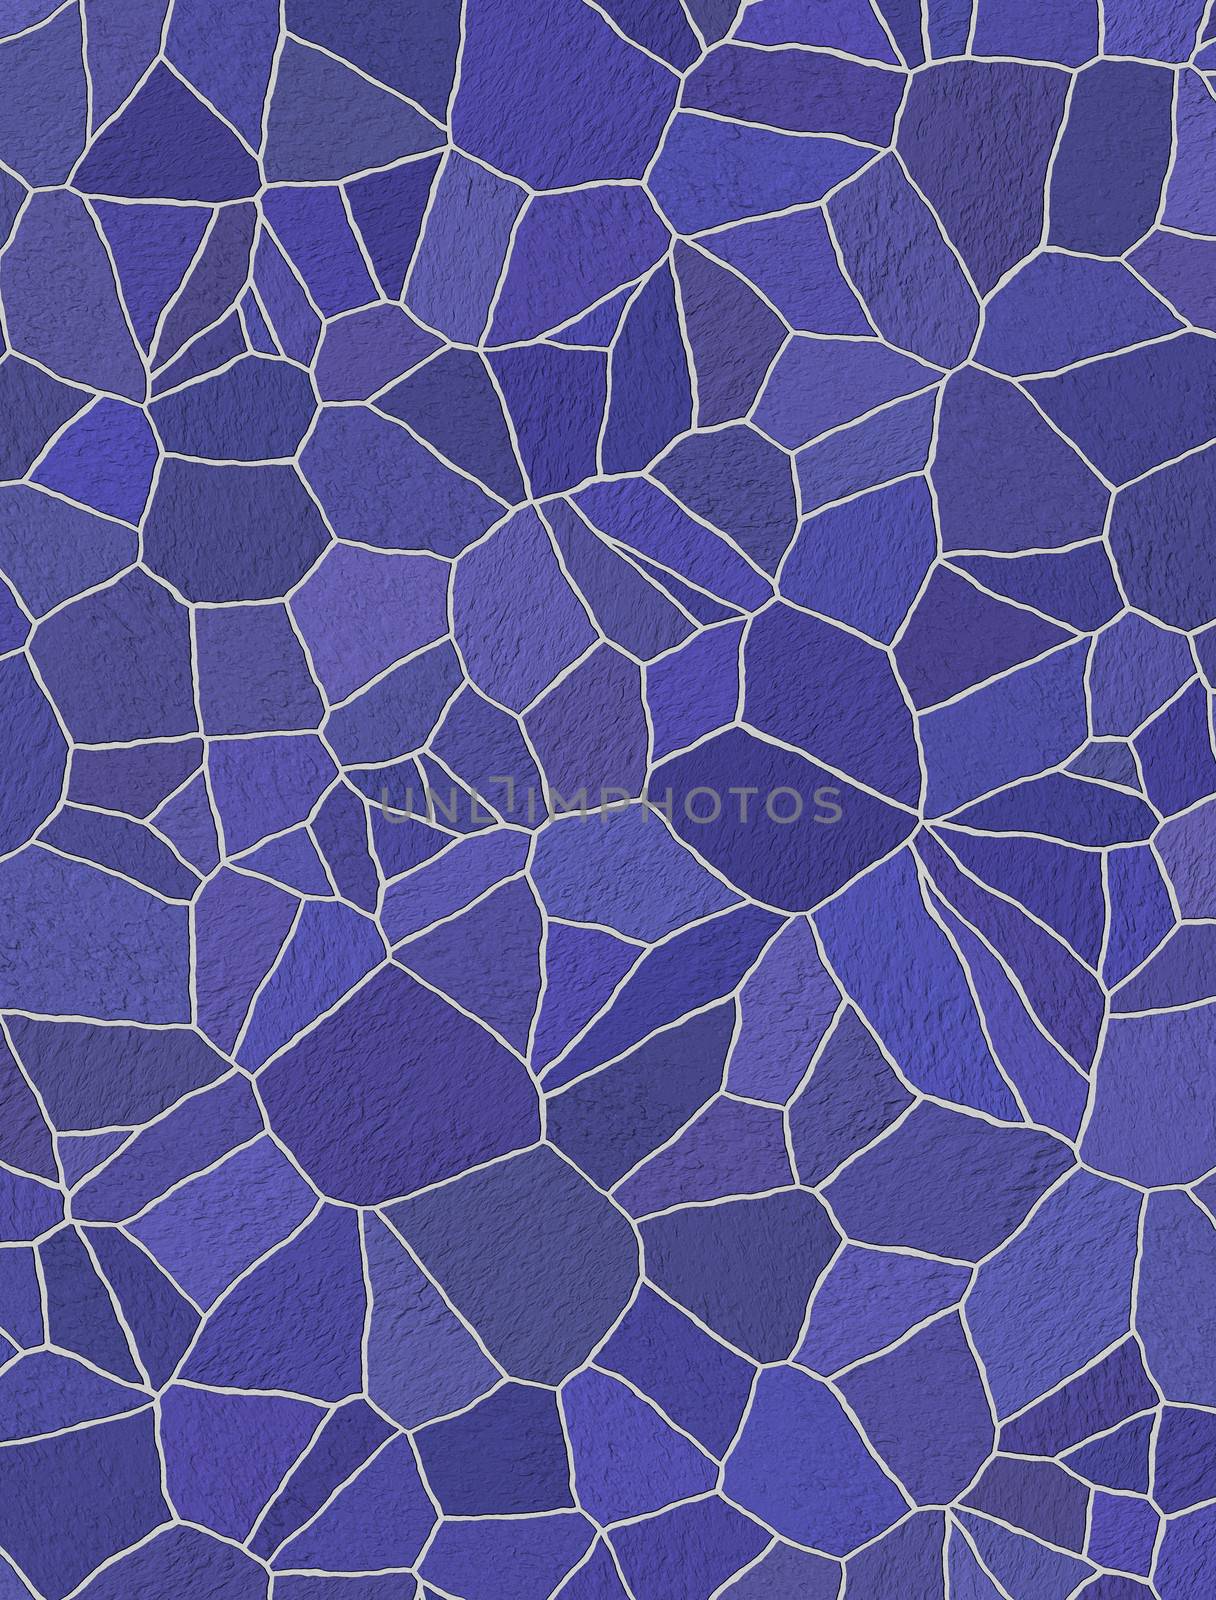 blue and purple rustic mosaic tile pattern